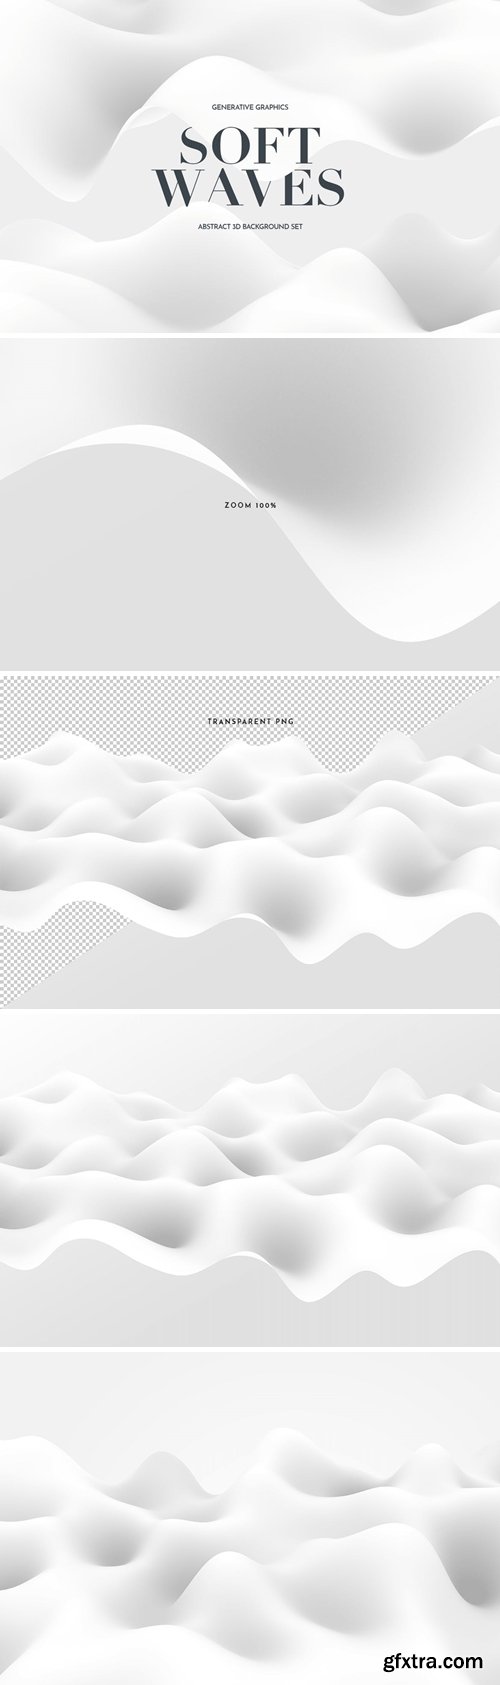 Soft White Waves Backgrounds Pack